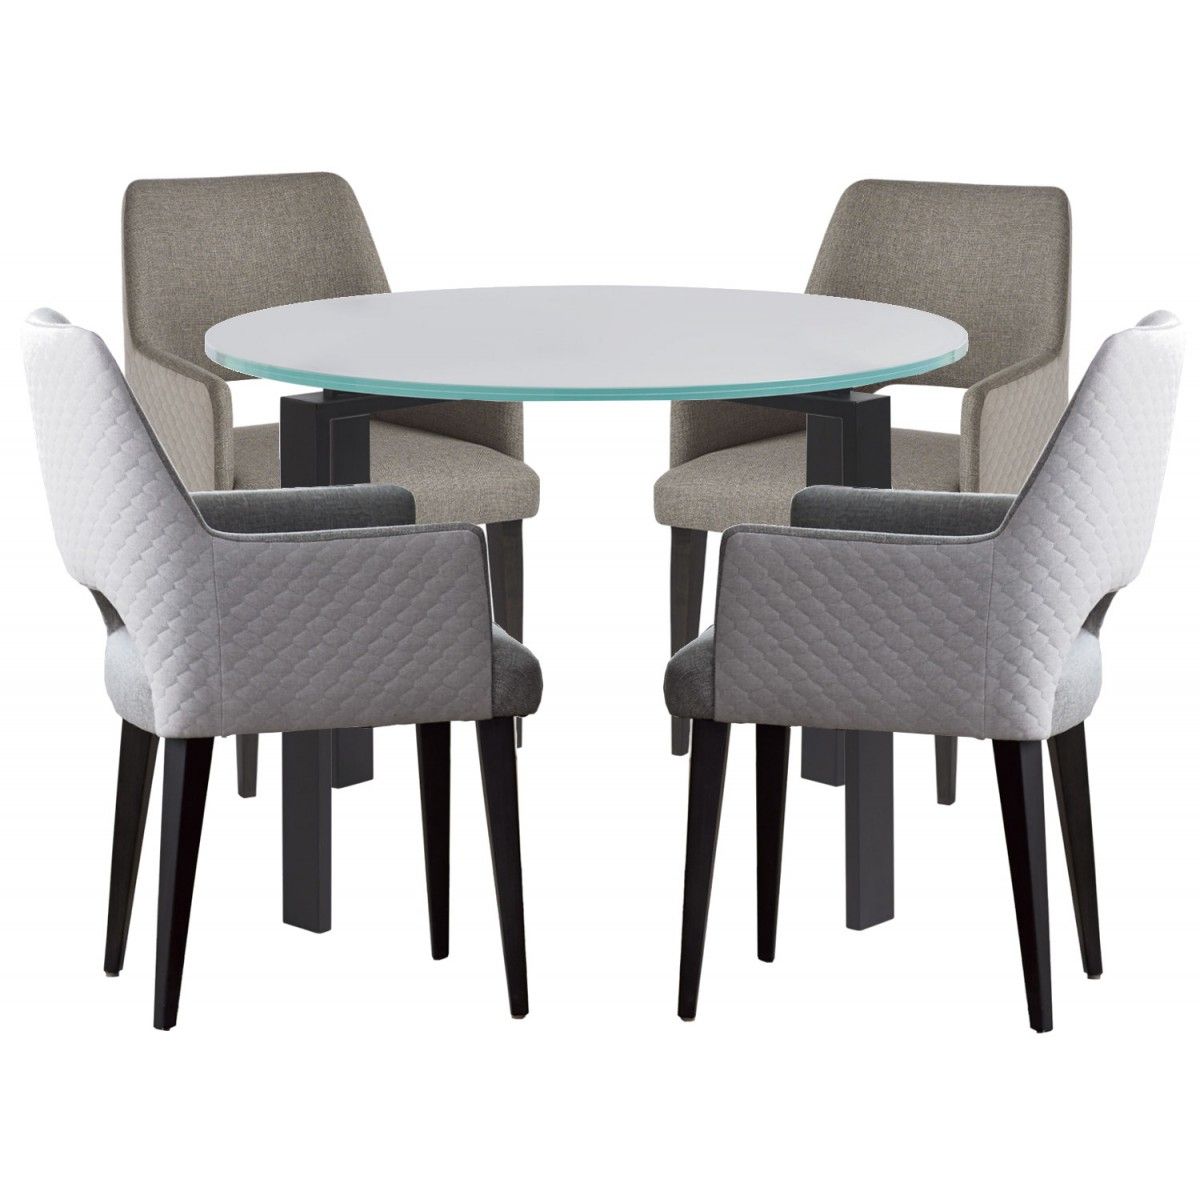 Universal Furniture Spaces Marshall 5pc Dining Table Set  Frosted Glass Top Intended For Madison Park Rachel Grey Media Credenzas (View 17 of 30)